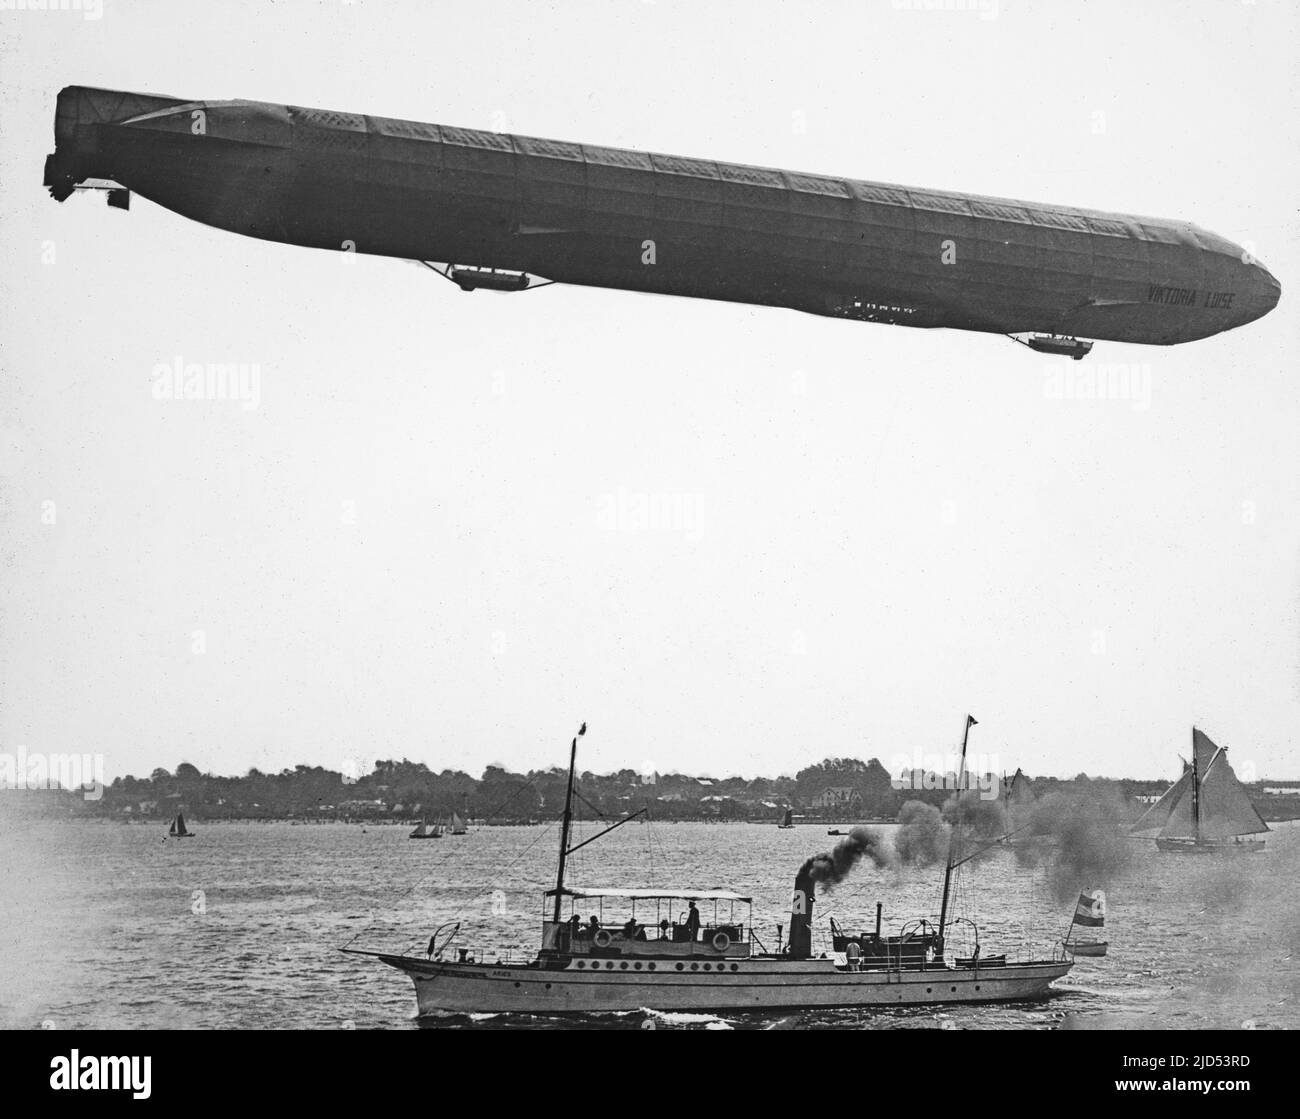 The Zeppelin LZ-11 Airship 'Viktoria Luise'. It made its first flight on 19th February 1912. Used by The German Navy at the start of World War 1. Damaged beyond repair in 1915. Stock Photo